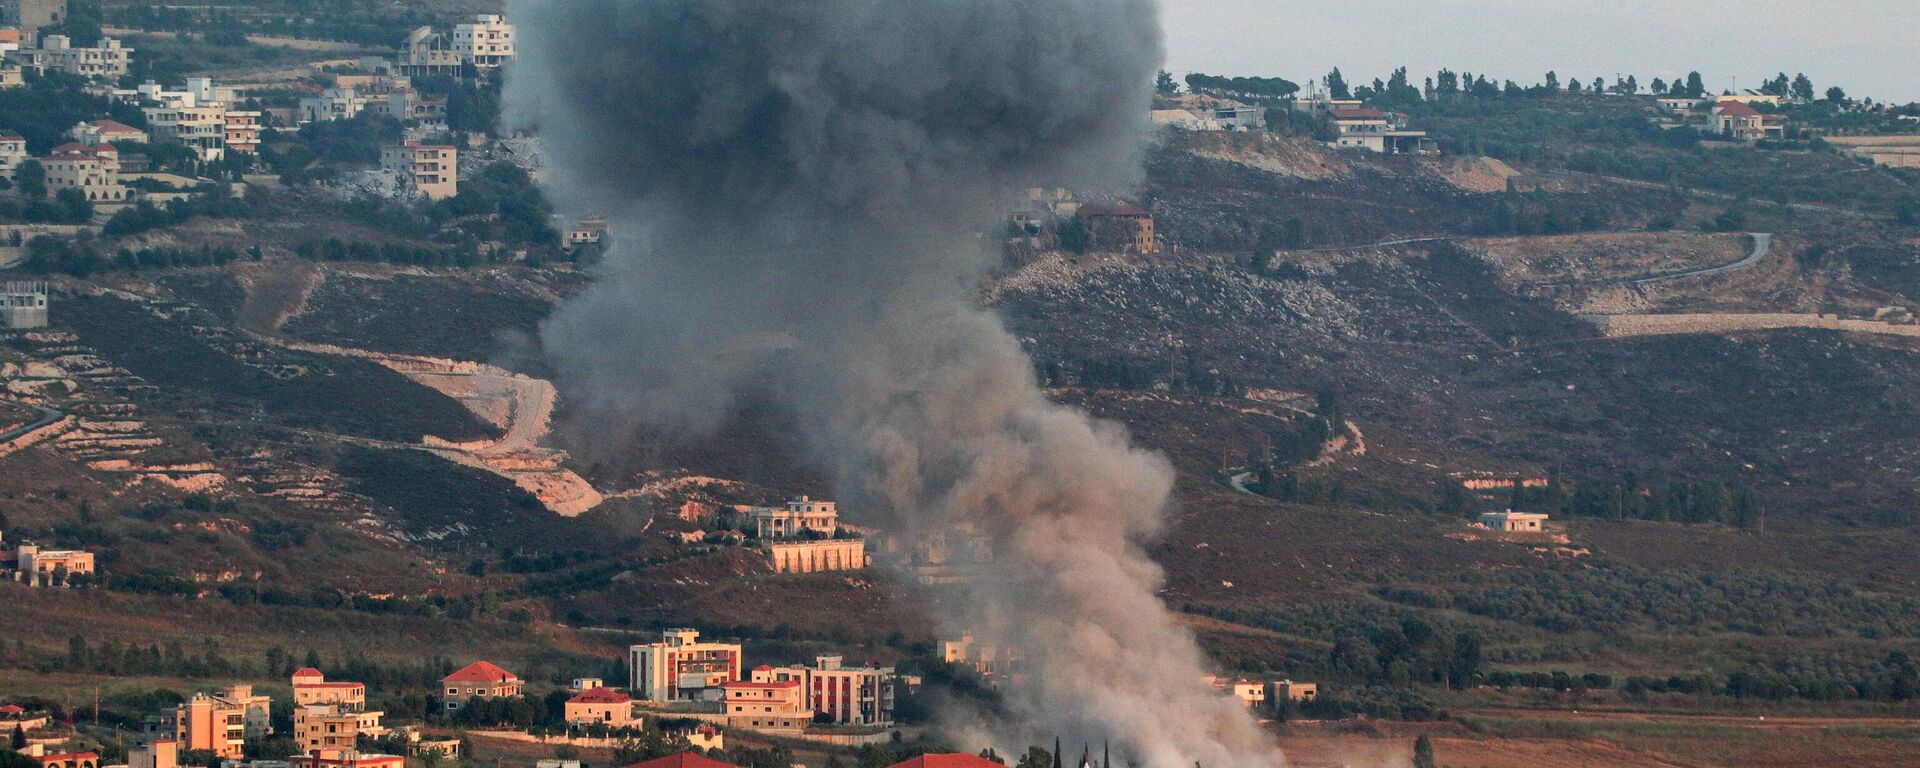 A smoke plume billows during Israeli bombardment on the village of Khiam in south Lebanon near the border with Israel on June 23, 2024 amid ongoing cross-border tensions as fighting continues between Israel and Hamas in the Gaza Strip.  - Sputnik International, 1920, 29.06.2024